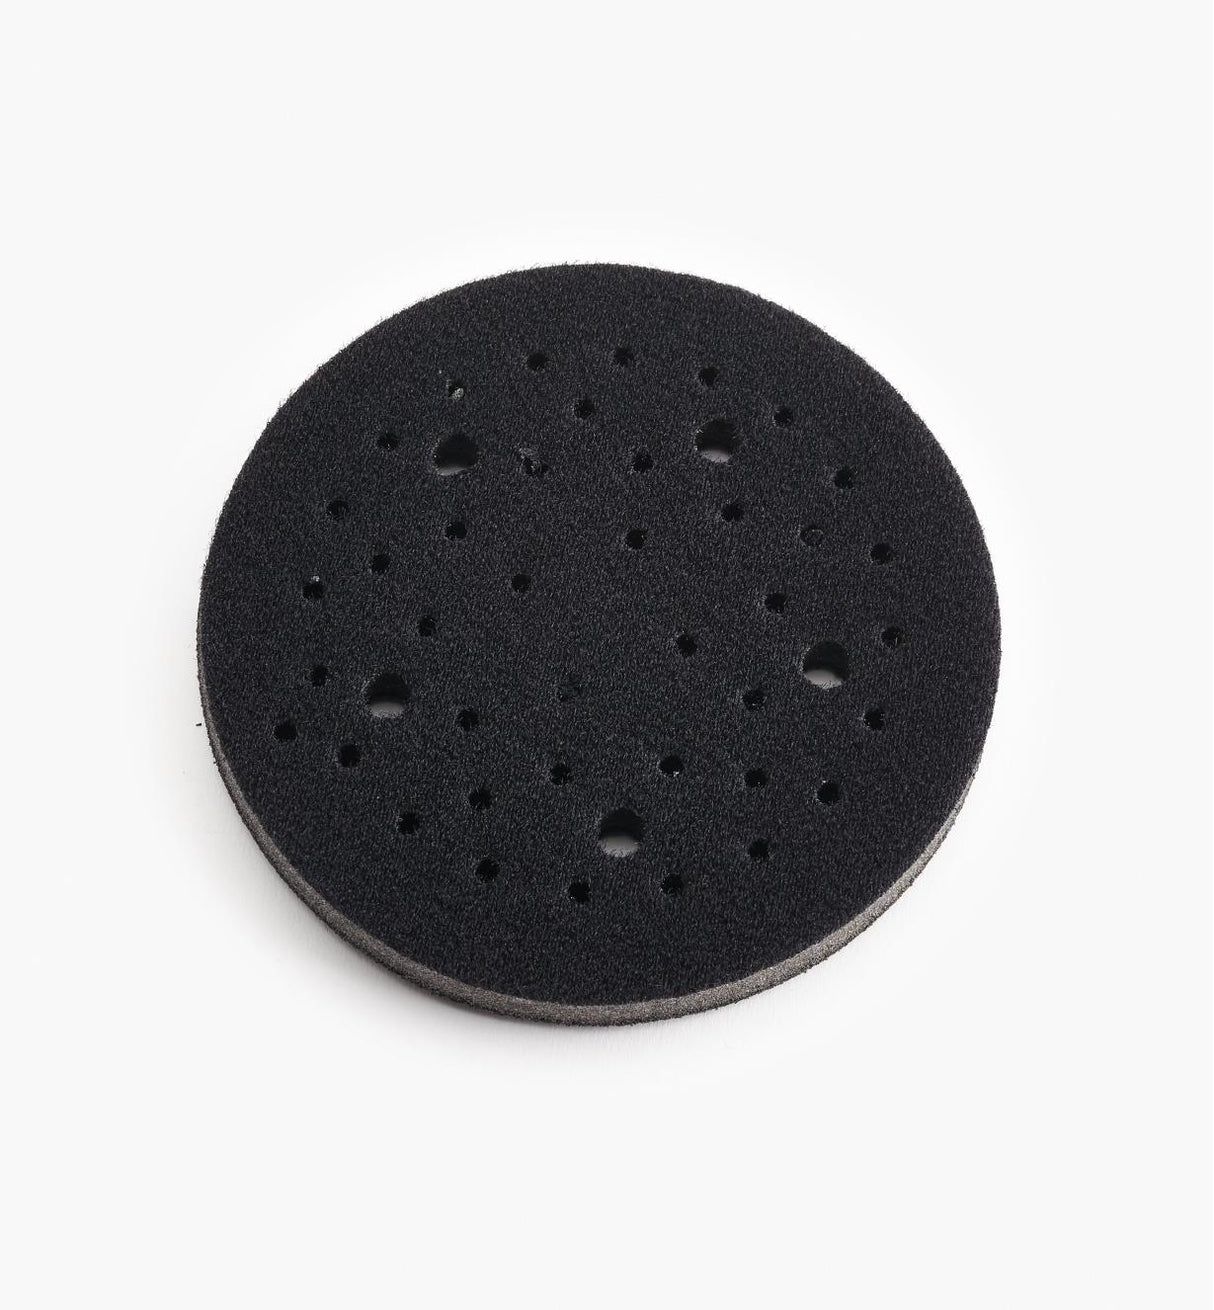 6" Sianet 1/2" Thick Foam Interface Pad